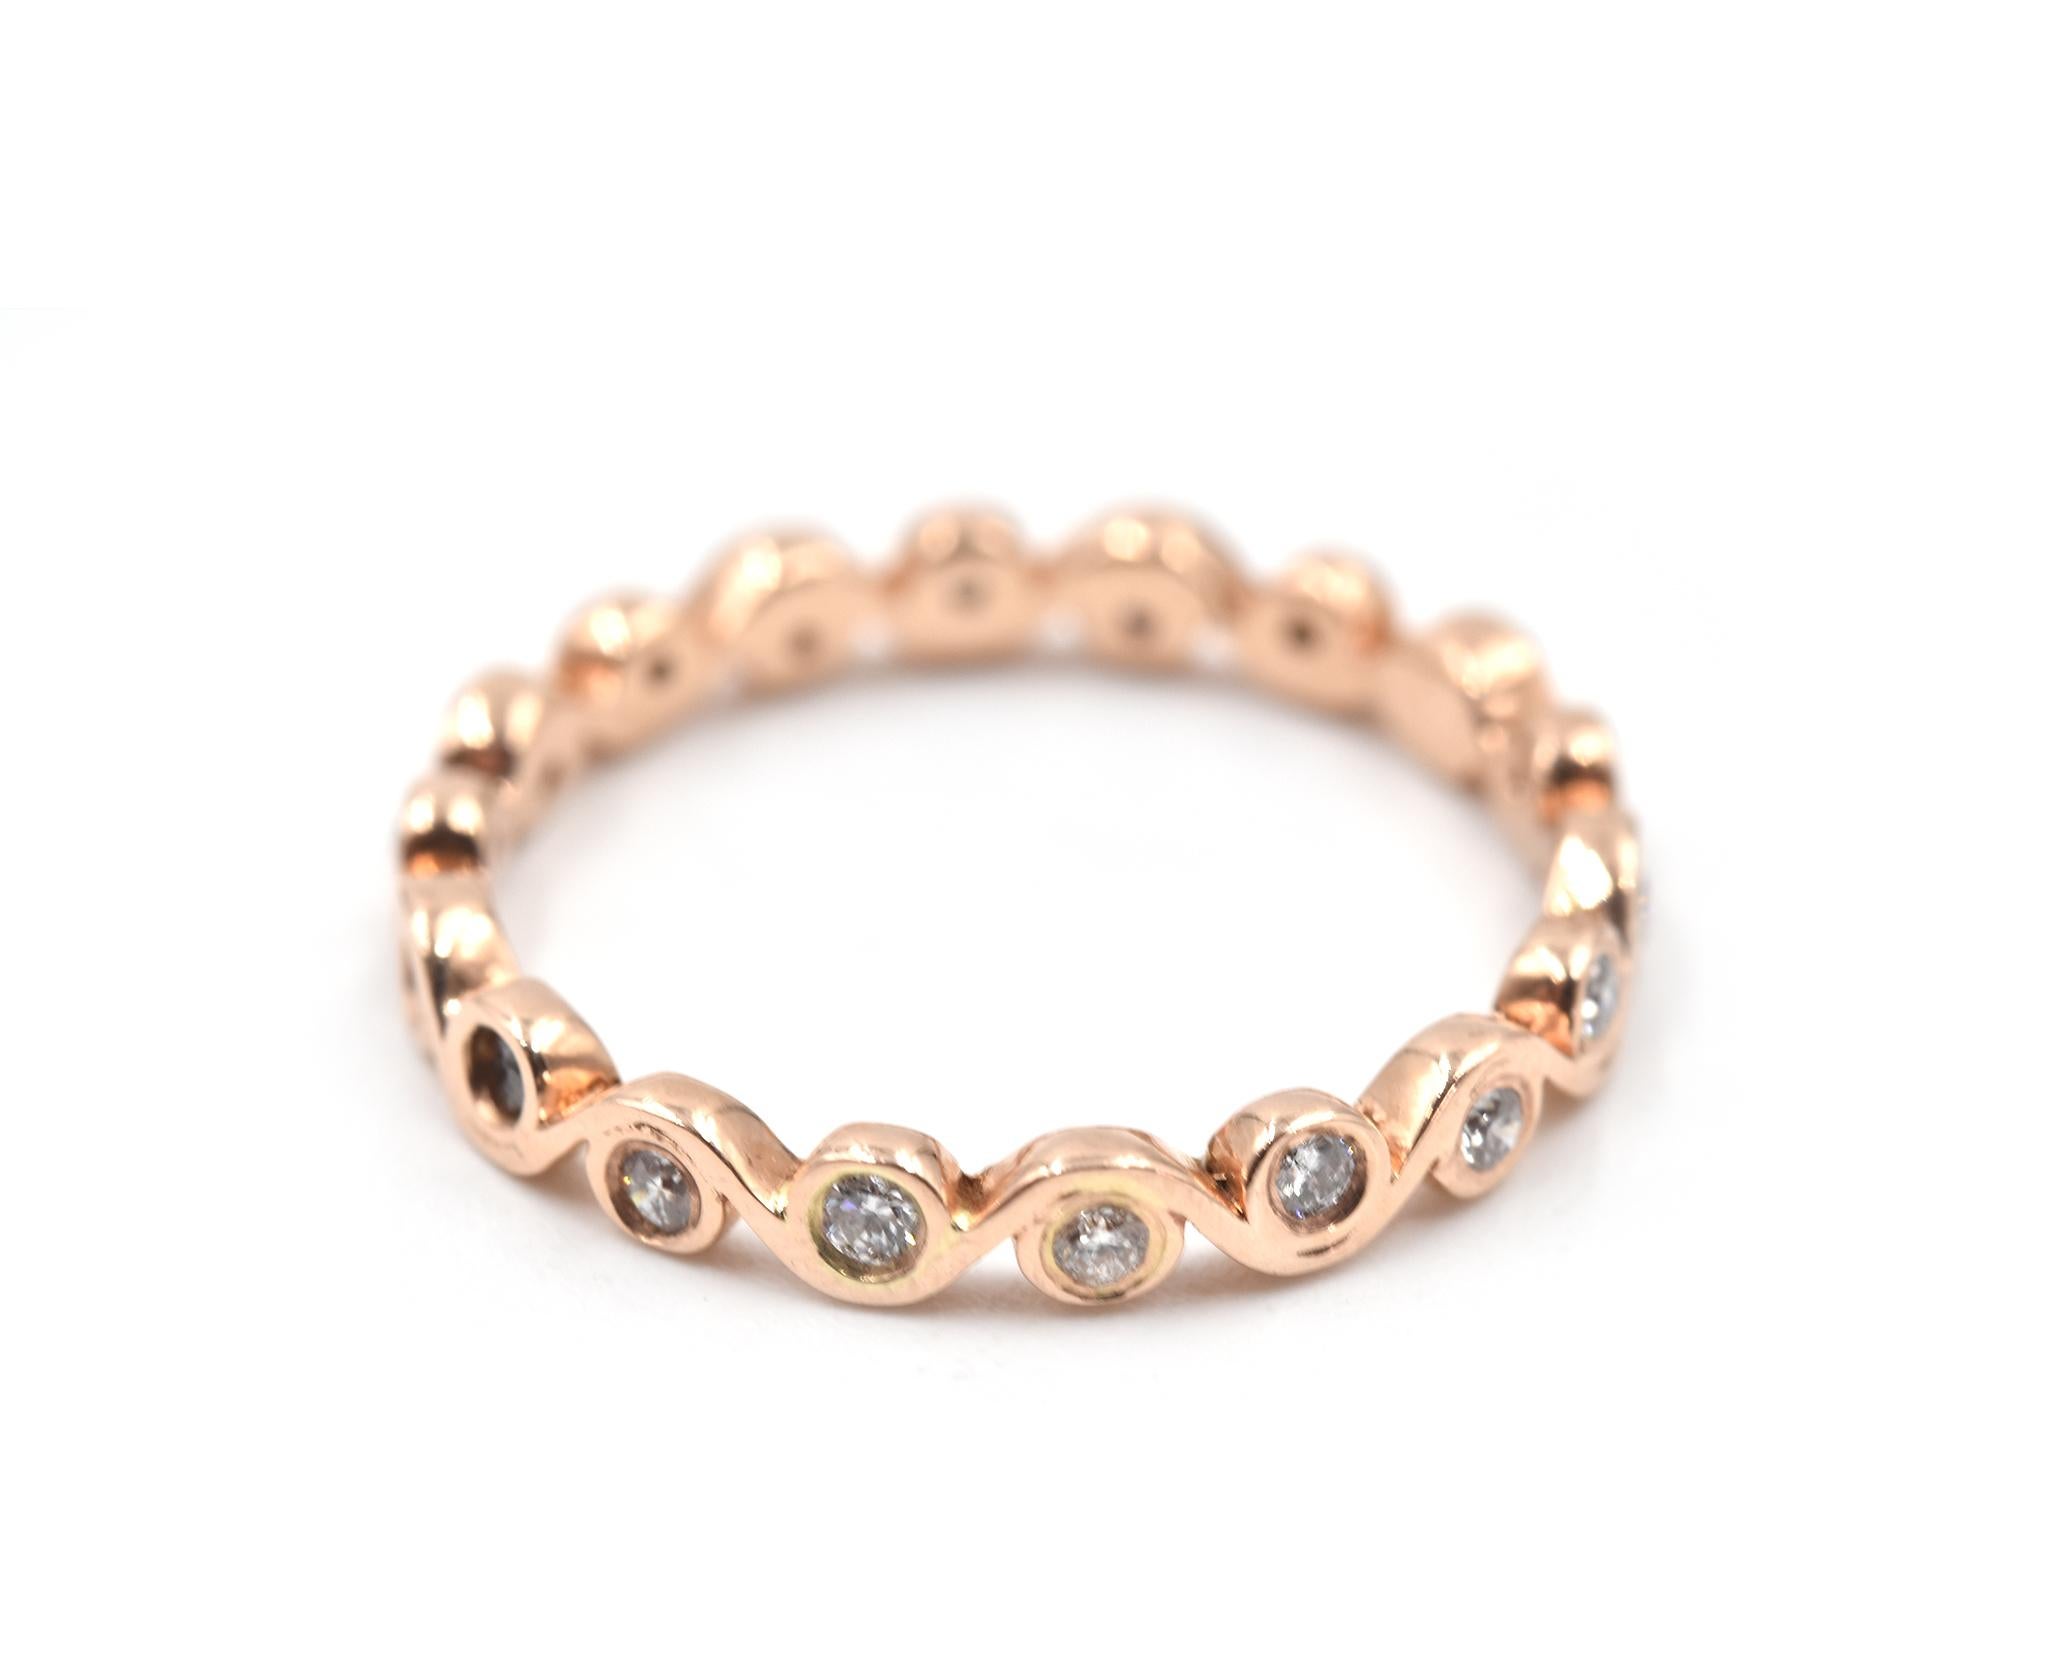 0.30 Carat Diamond 14 Karat Rose Gold Swirl Style Eternity Band In Excellent Condition For Sale In Scottsdale, AZ